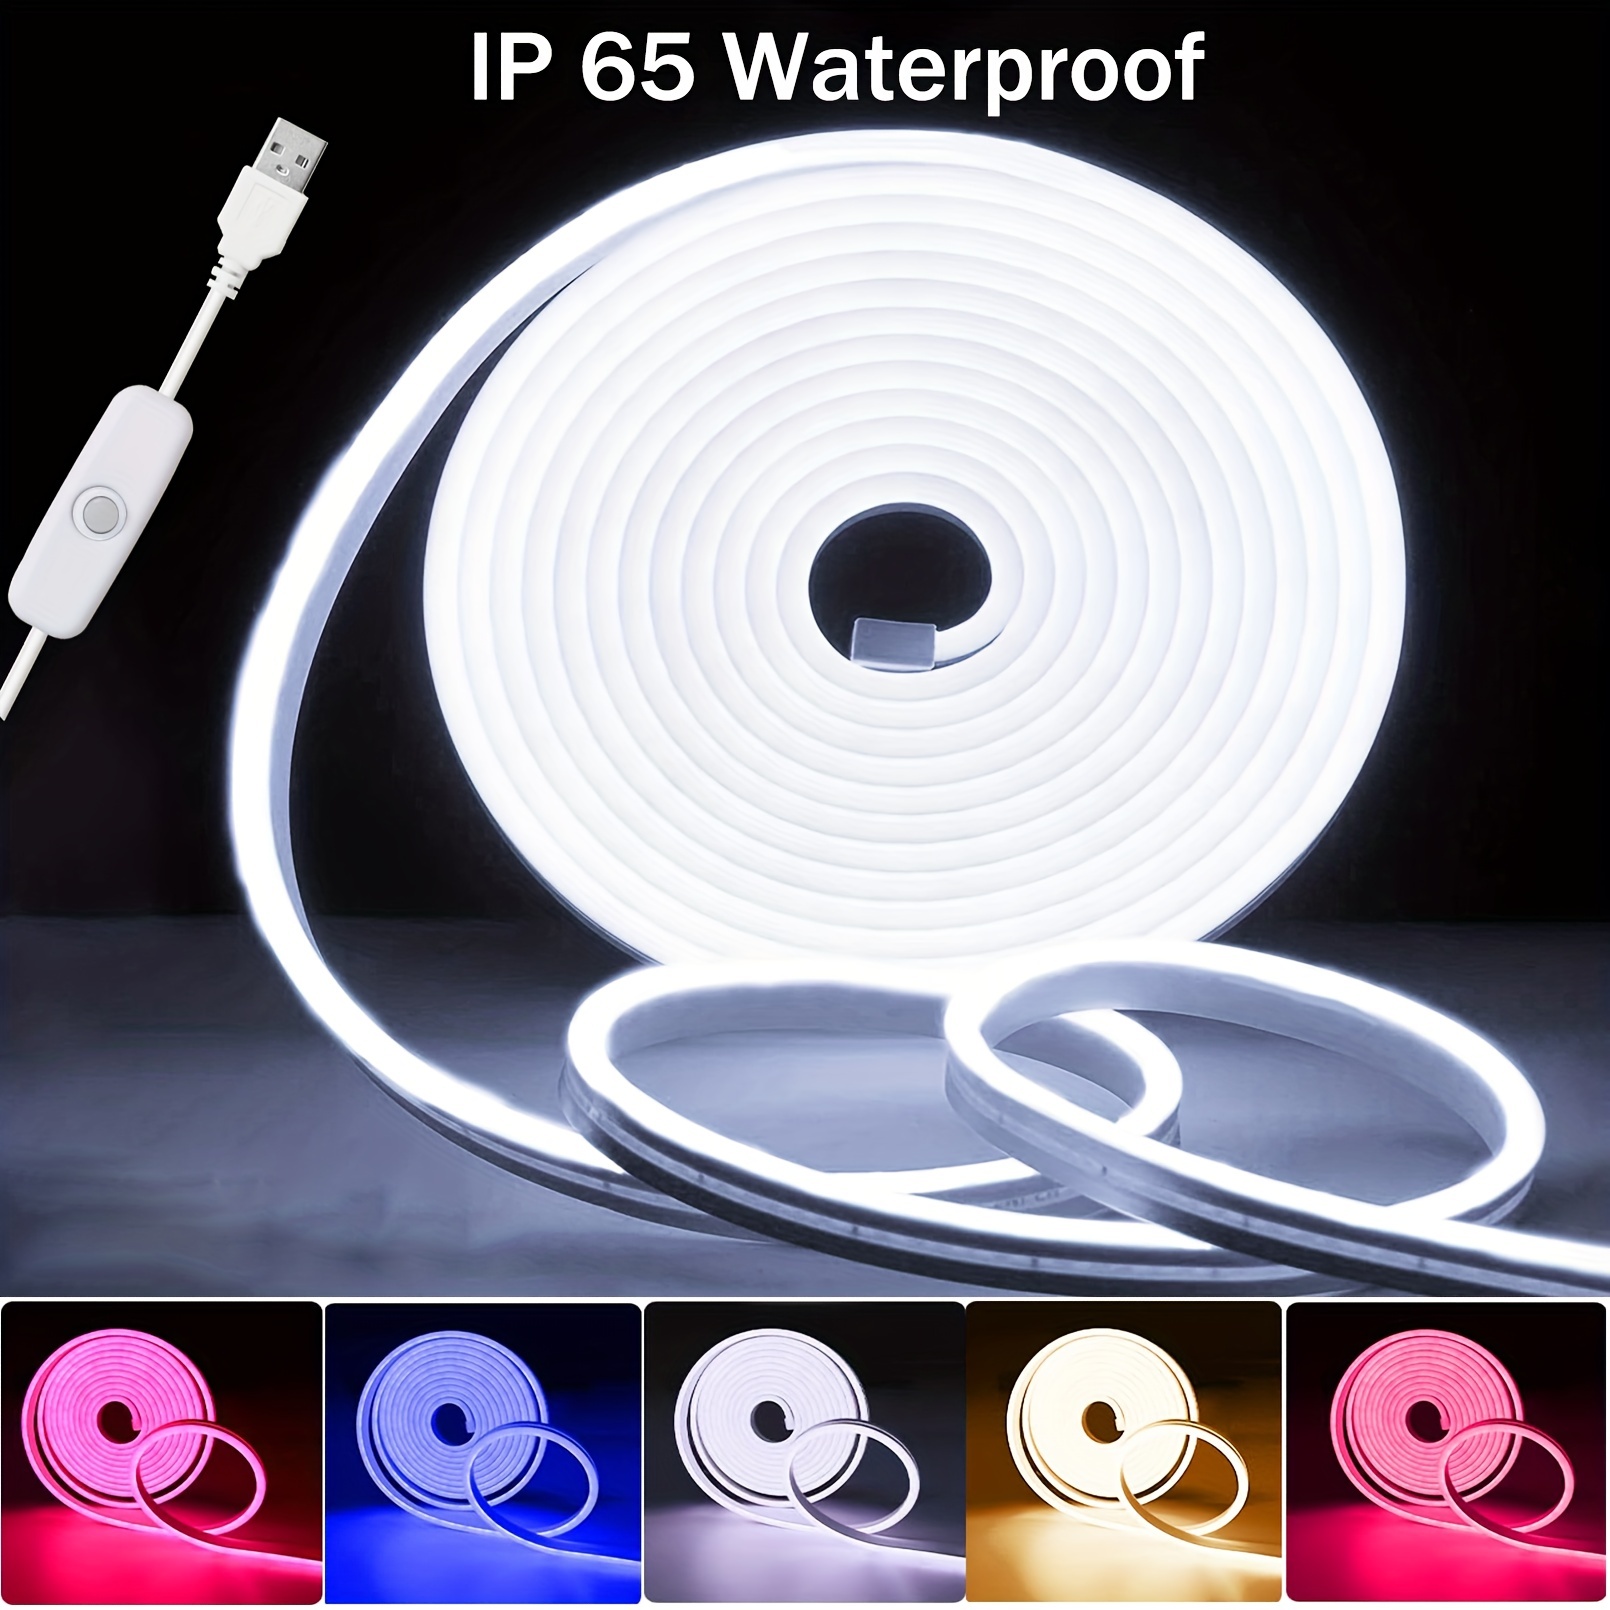 Neon Rope Light 5v Usb 9.8ft/3m With Switch Control Led Strip